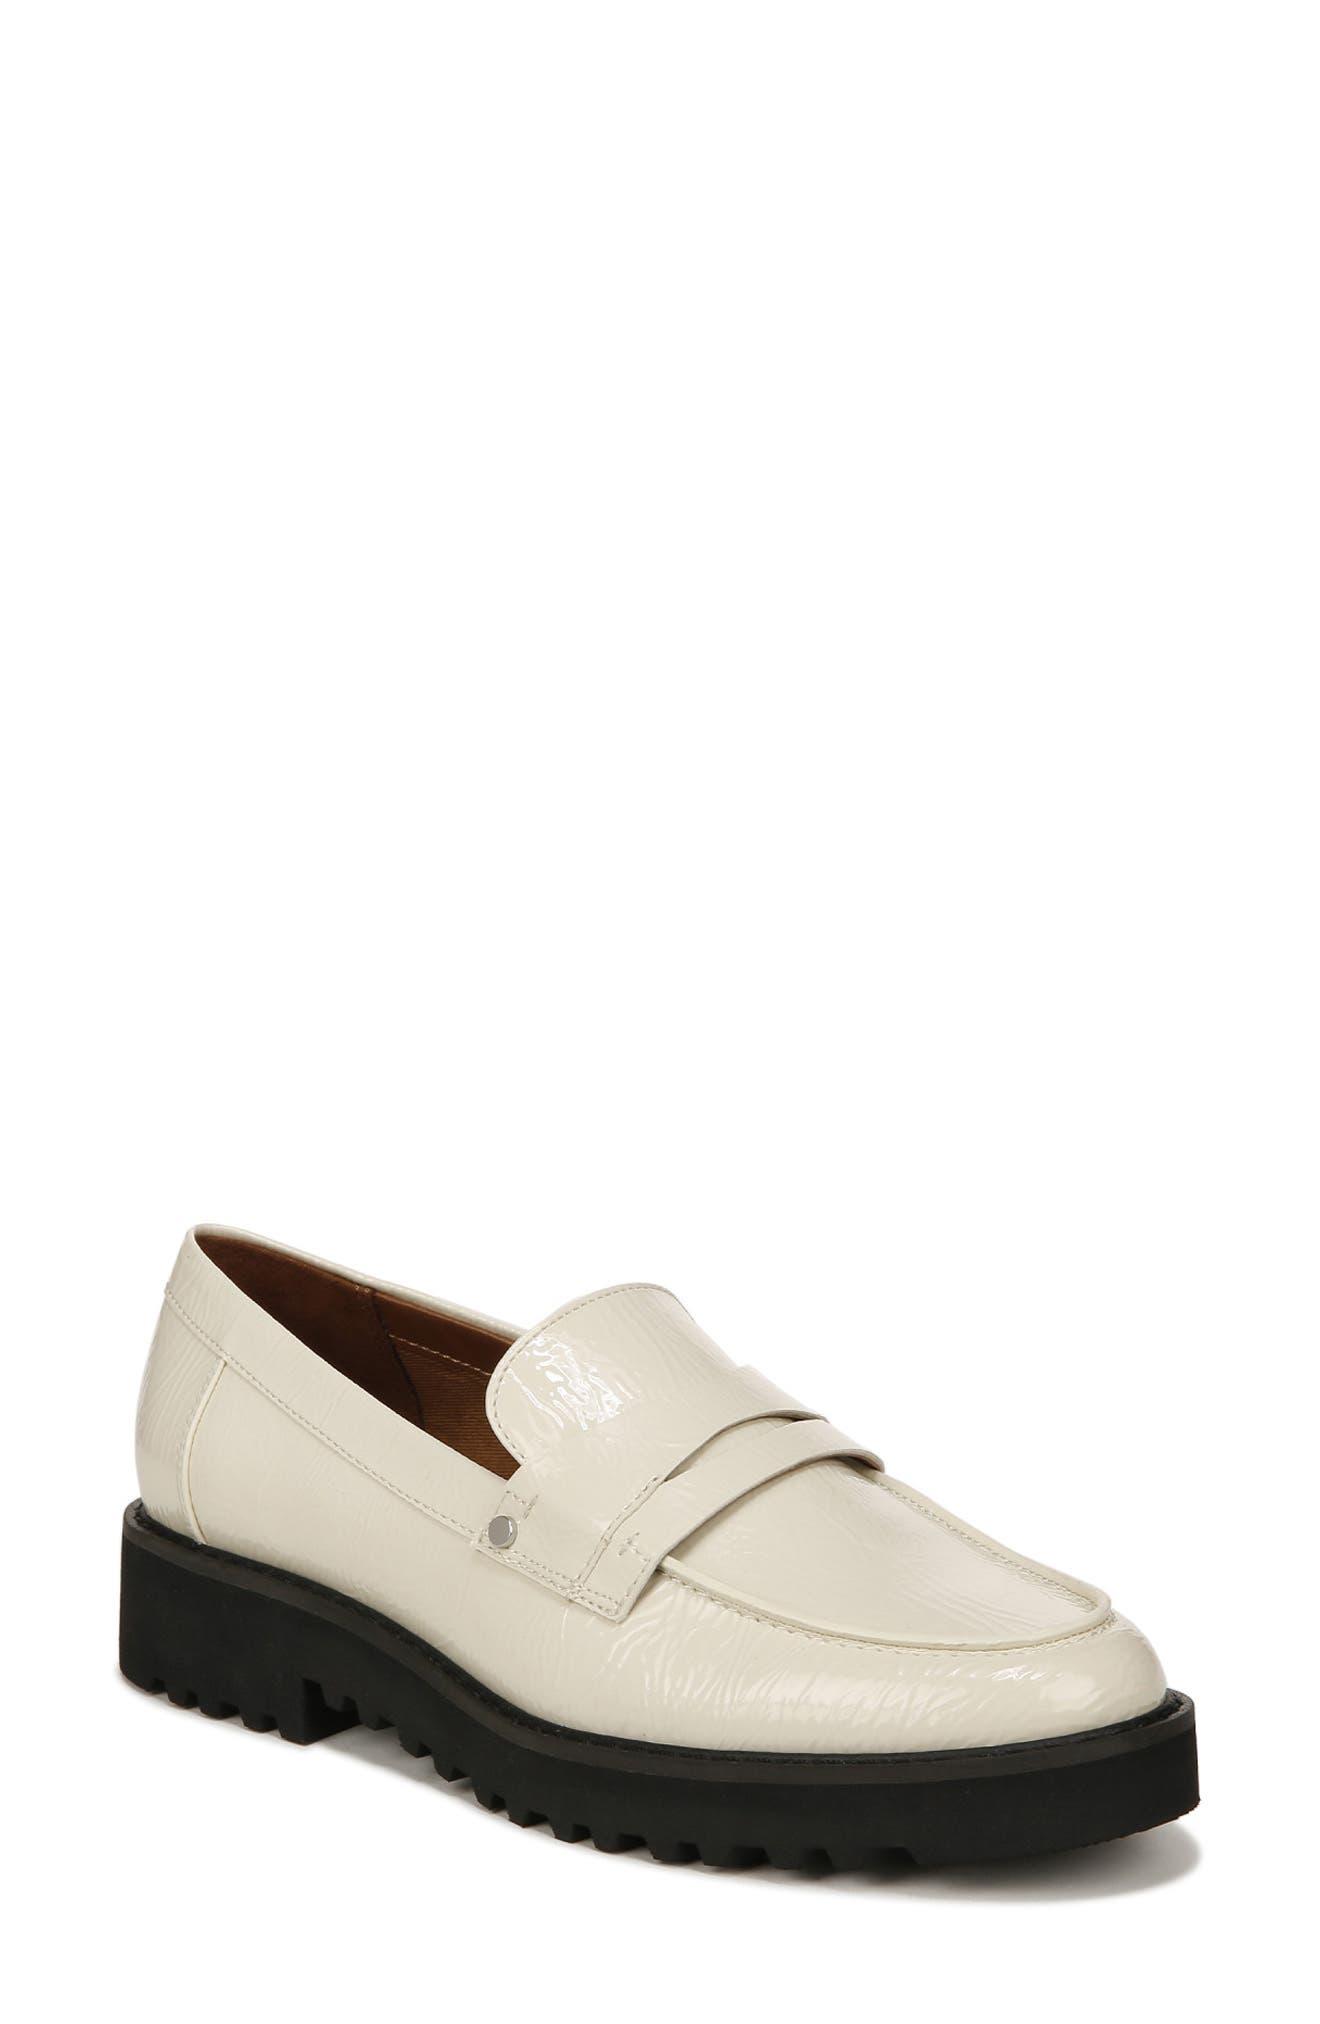 Franco Sarto Cassandra Patent Lug Sole Penny Loafer in White | Lyst